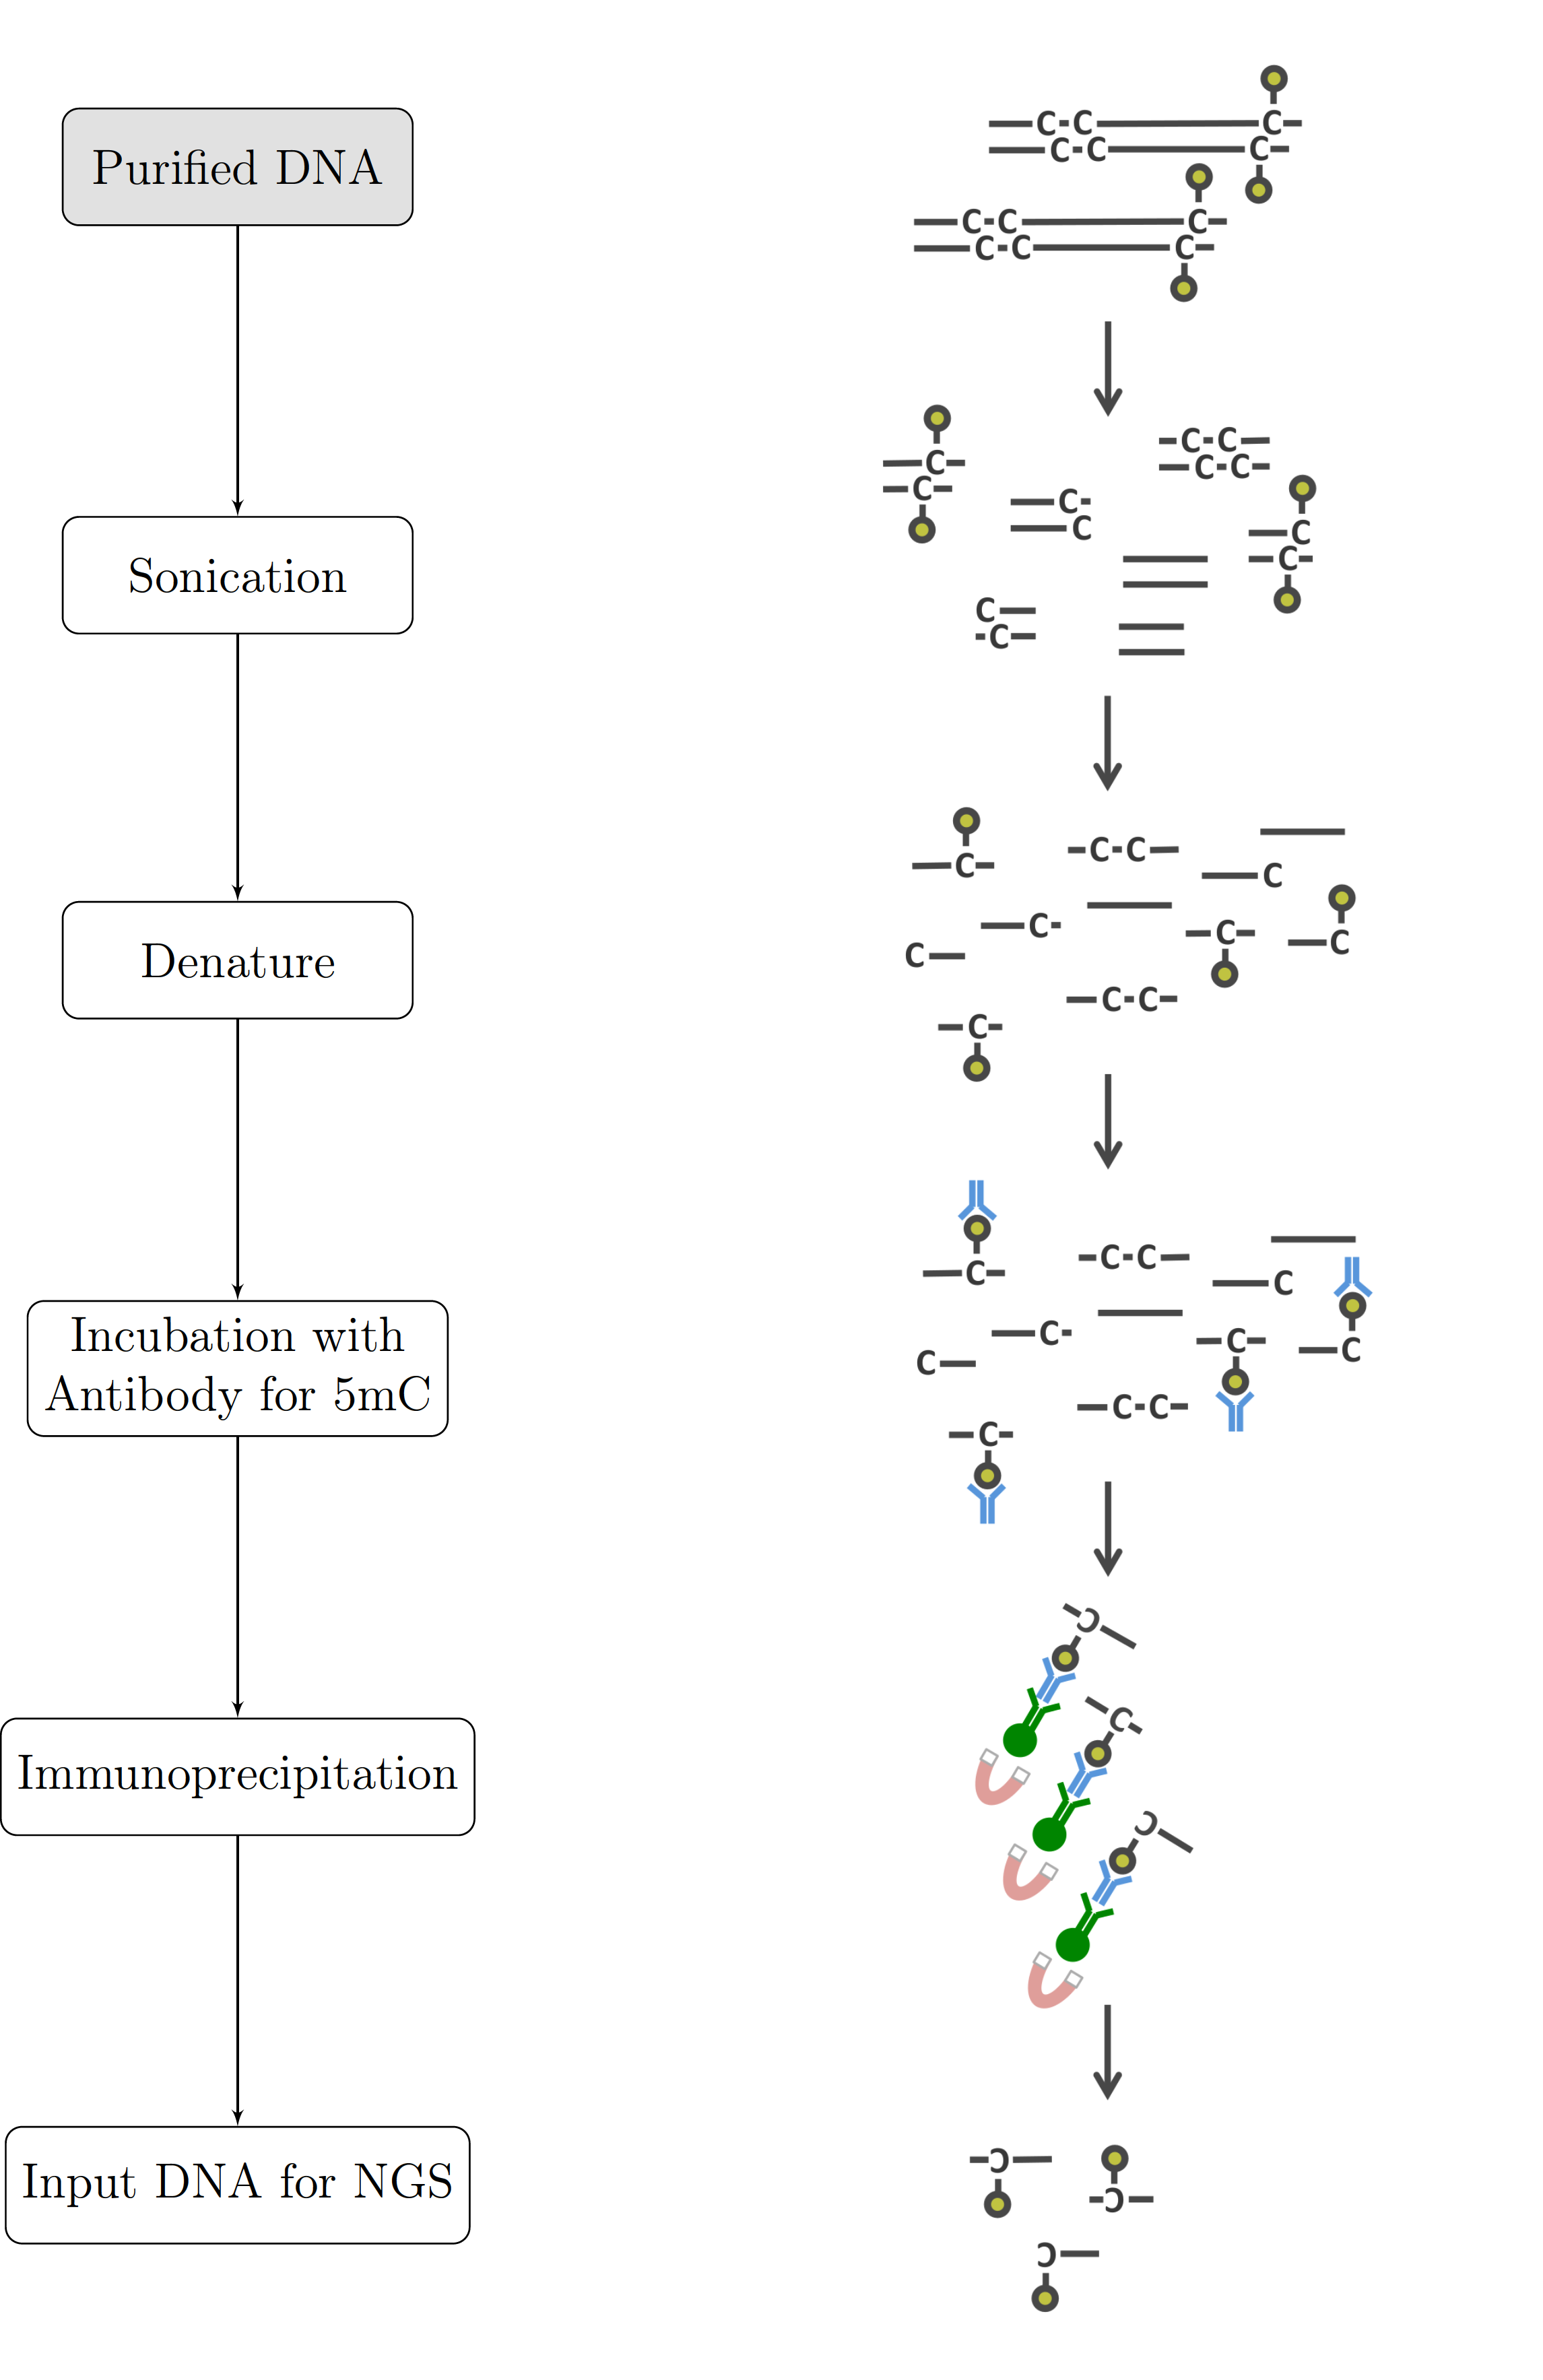 Graphical Summary of the MeDIP-seq process Purified DNA is fragmented by sonication, denatured and incubated with anti-5mC antibodies. It is then immunoprecipitated resulting in fragments containing methylated CpGs which are subsequently sequenced.